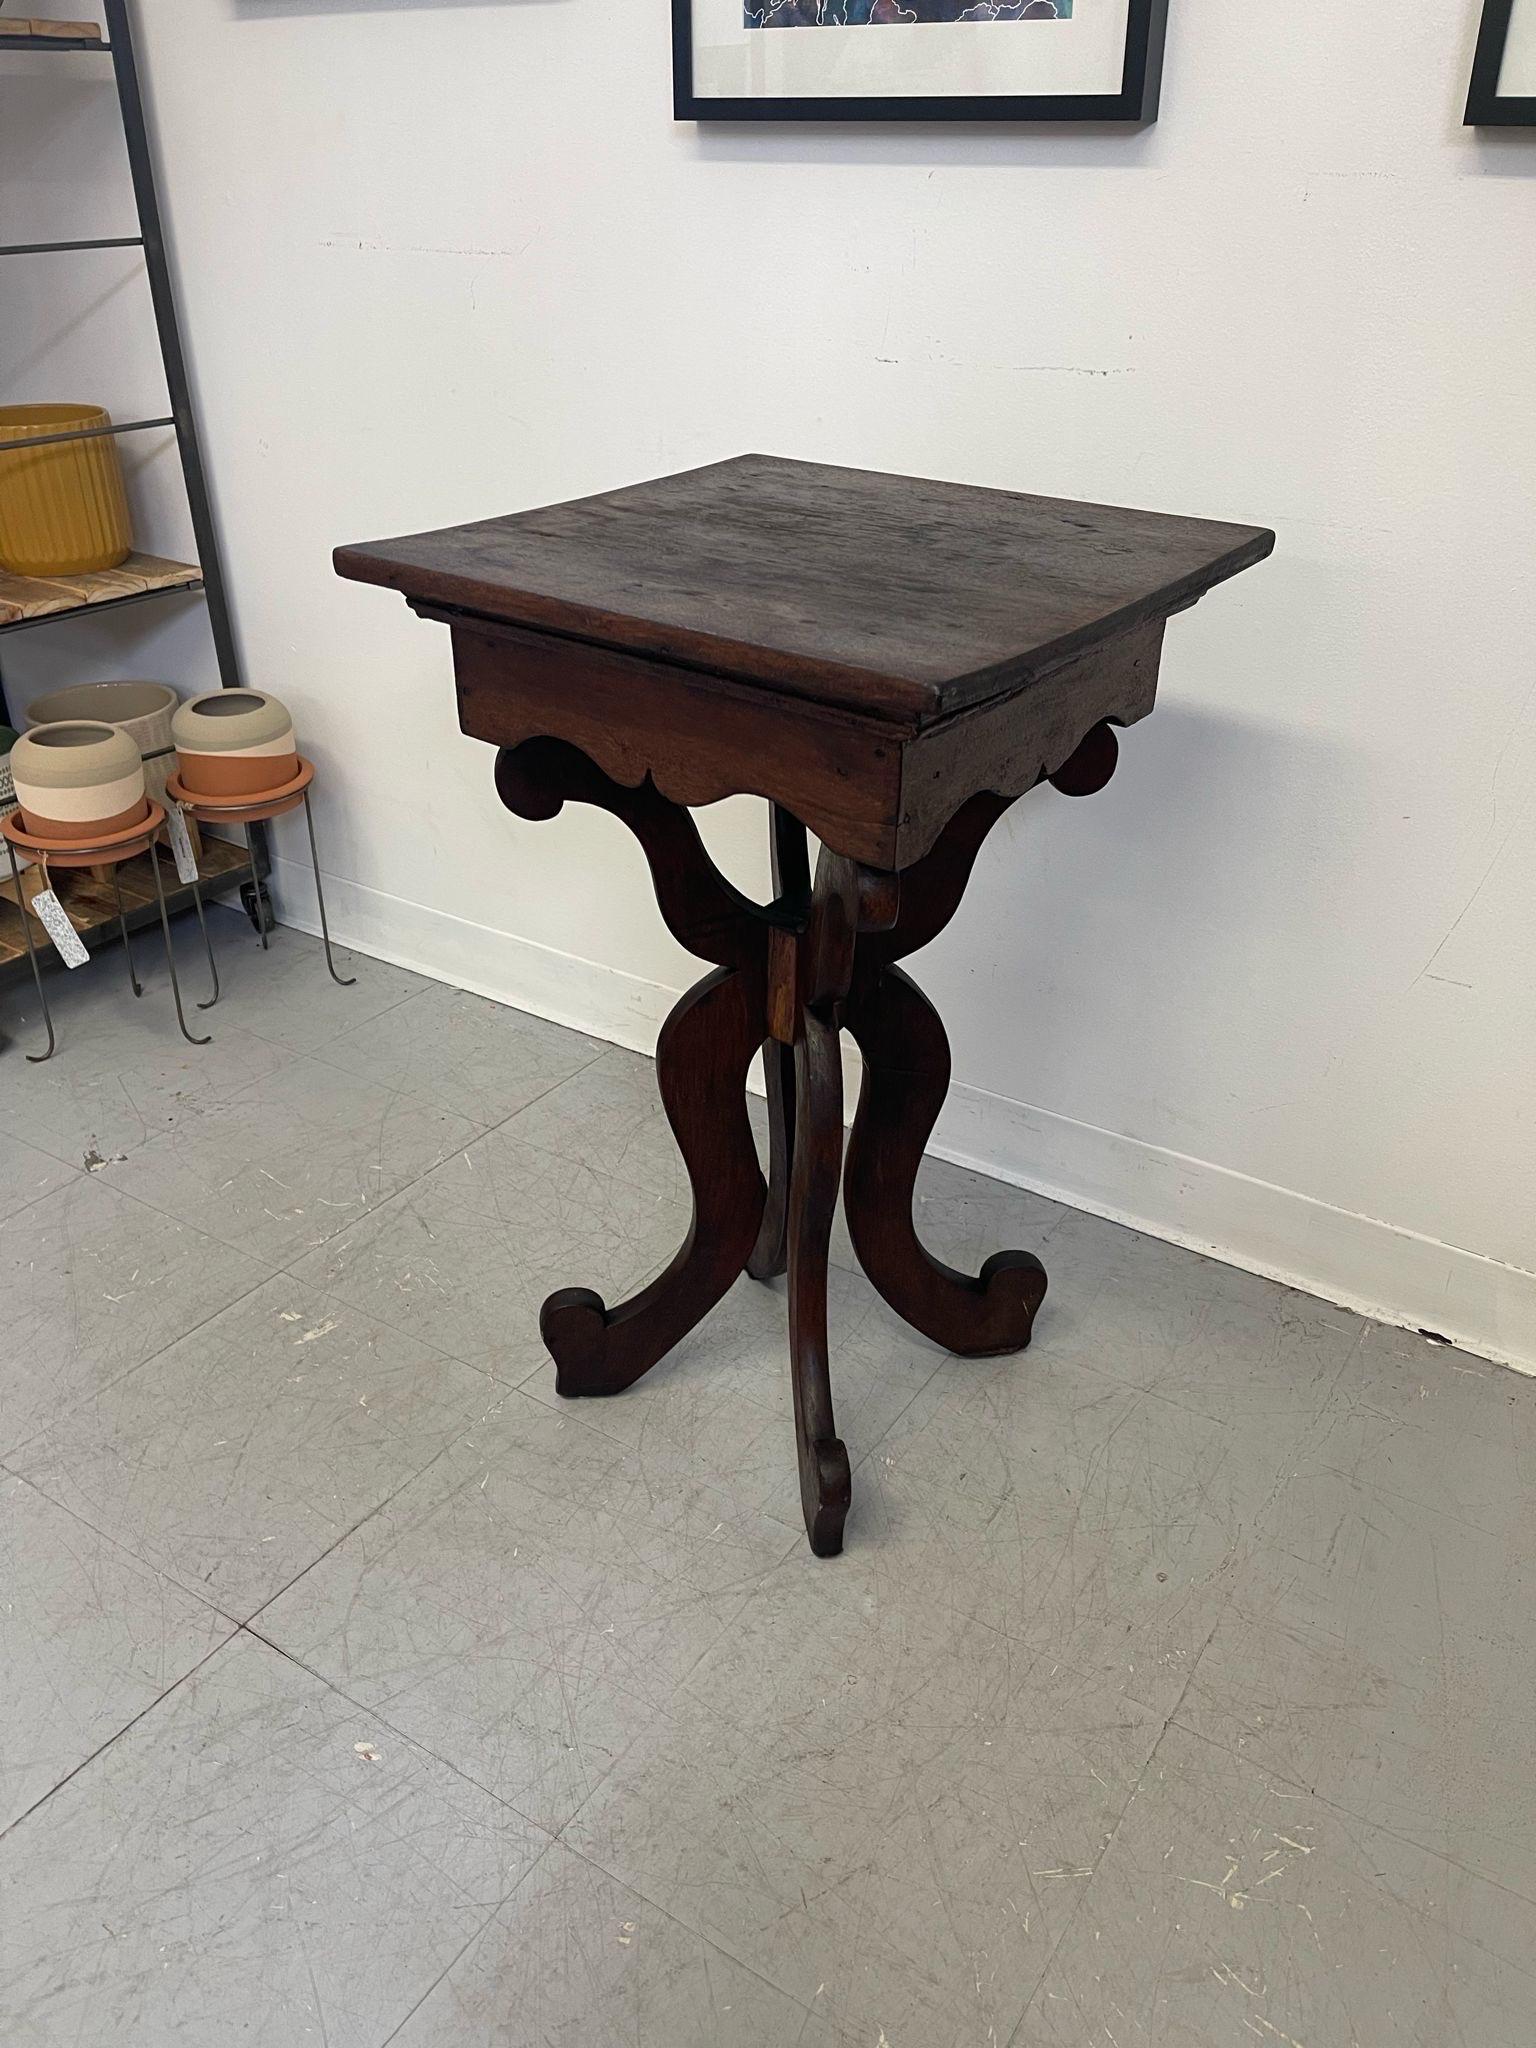 This Vintage Side Table has Beautiful Victorian Style Lines Throughout. Slight Curving of the wood on Top due to Aging. Vintage Condition Consistent with Age as Pictured. Wood Has Beautiful Character and Petina.

Dimensions. 18 W ; 17 1/2 D ; 29 H